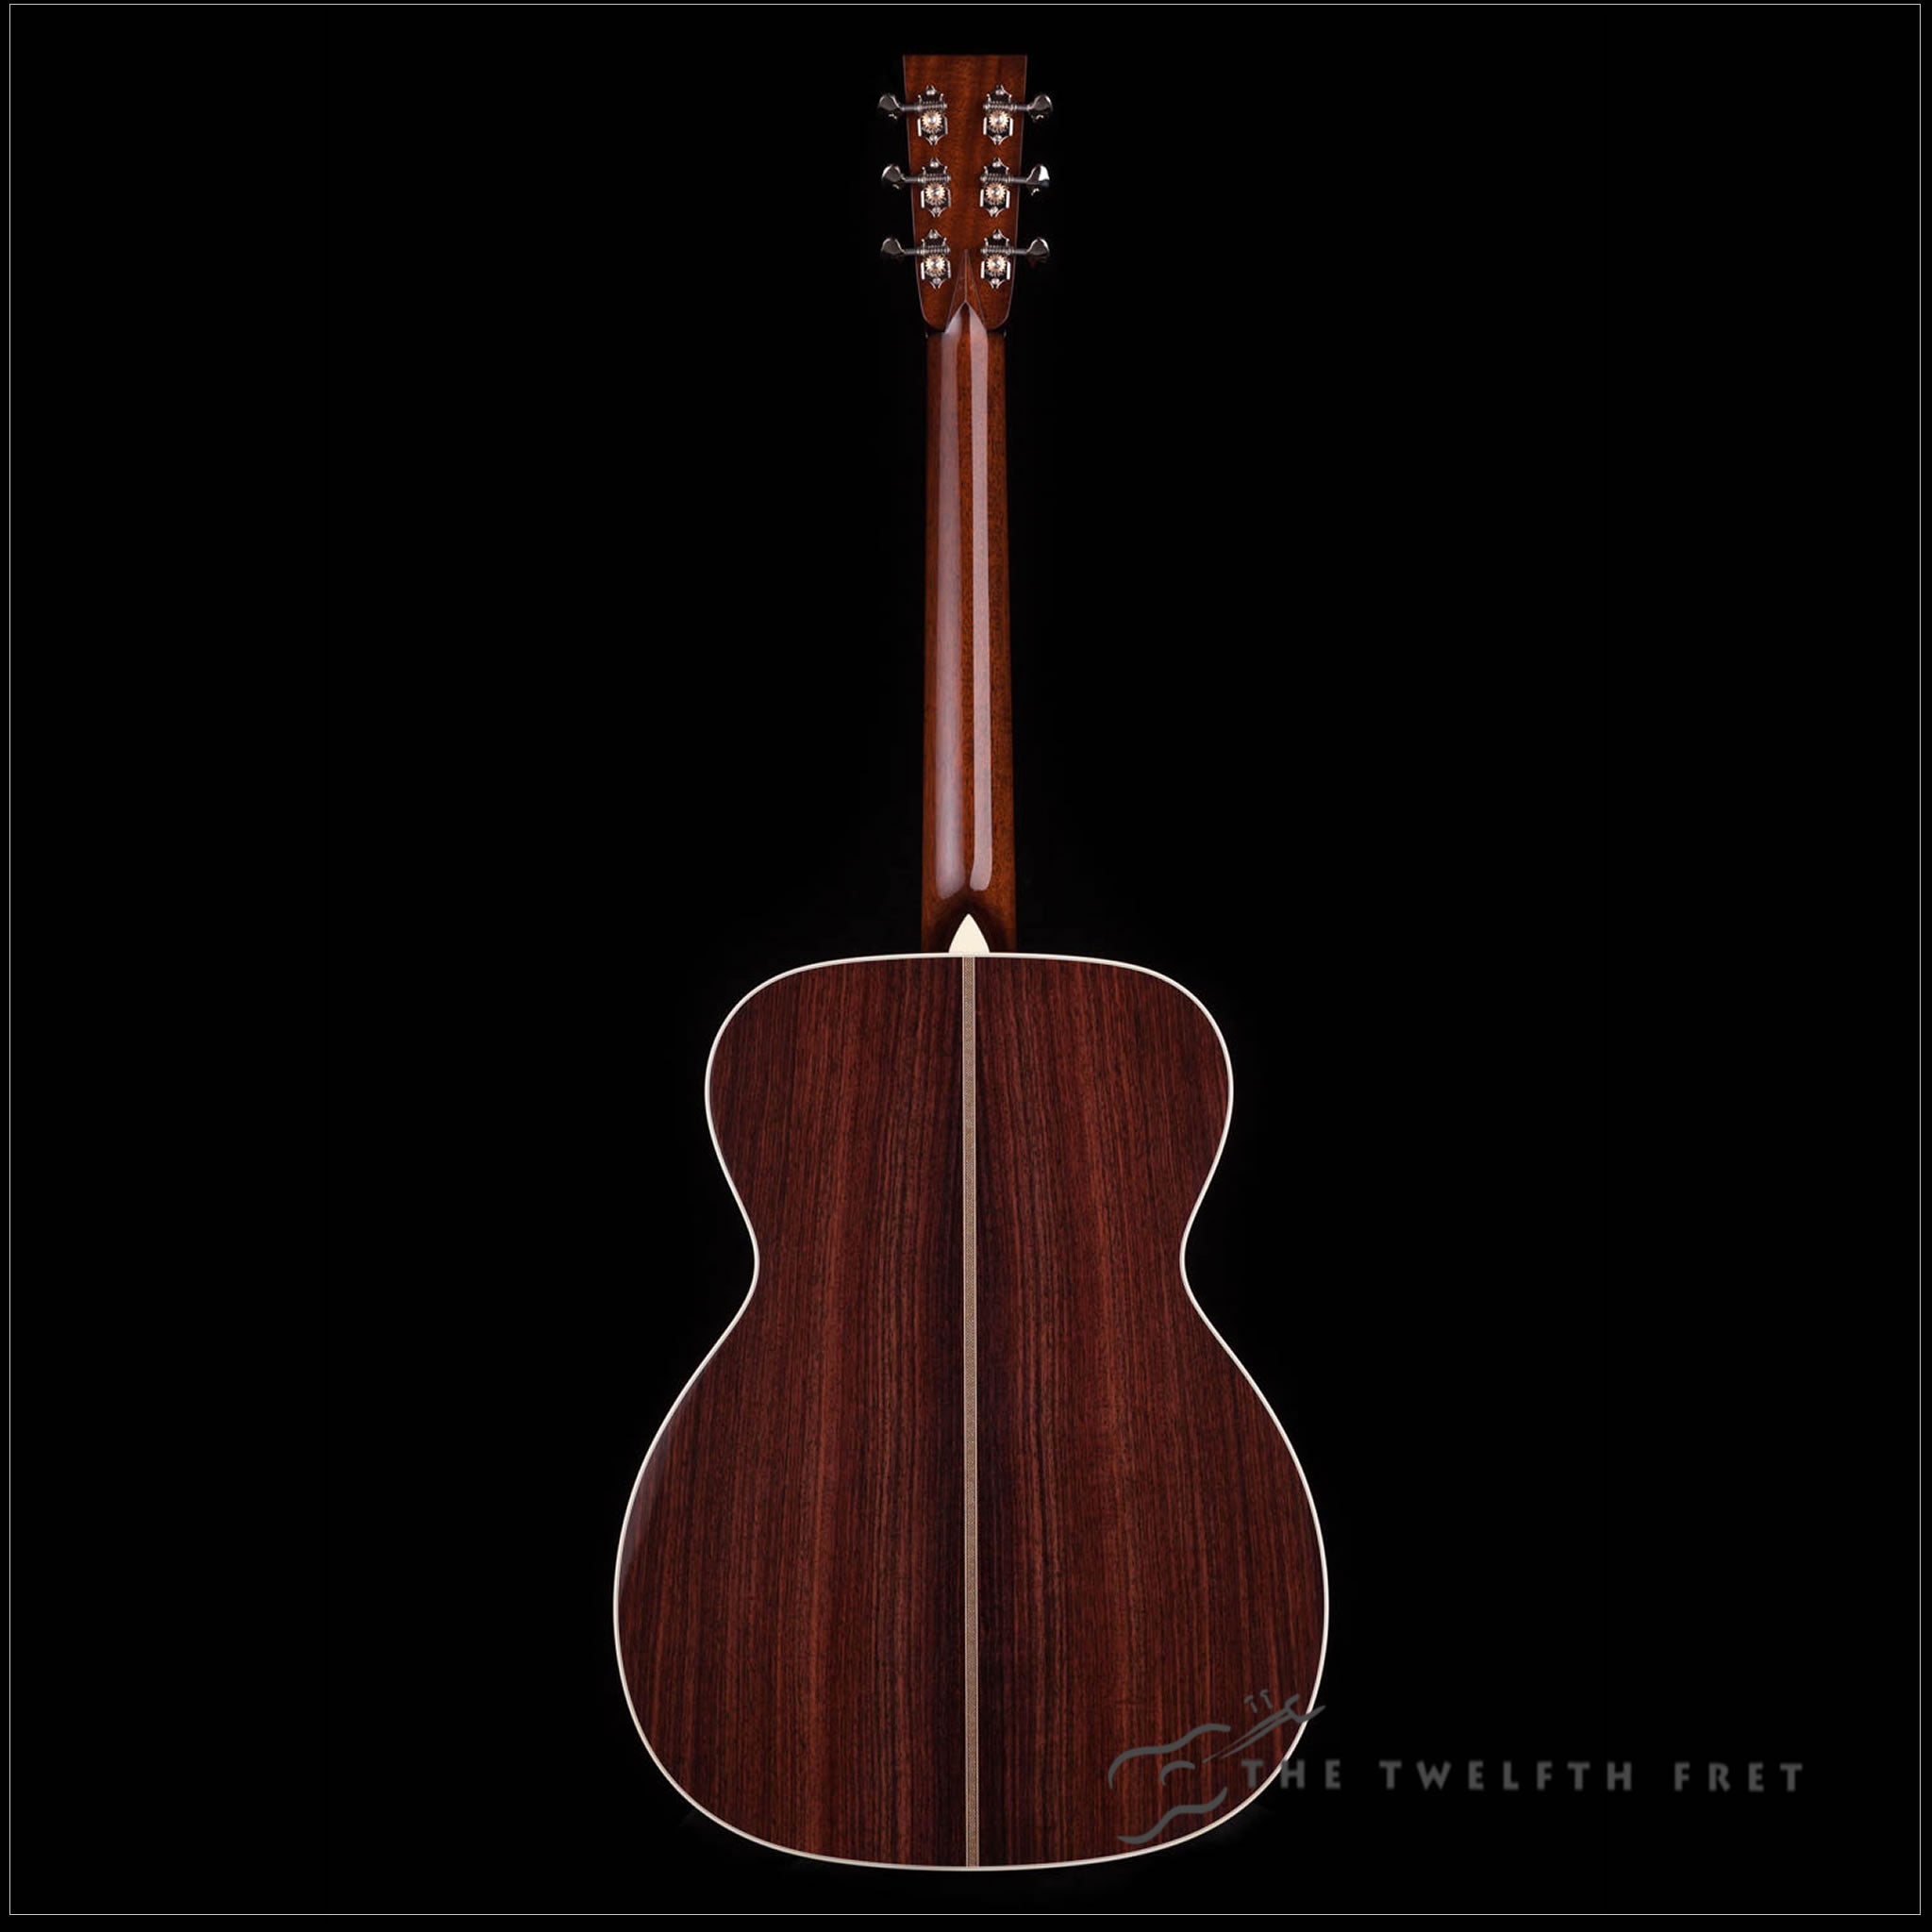 Collings OM2H Acoustic Guitar with 1 3/4" Nut - The Twelfth Fret